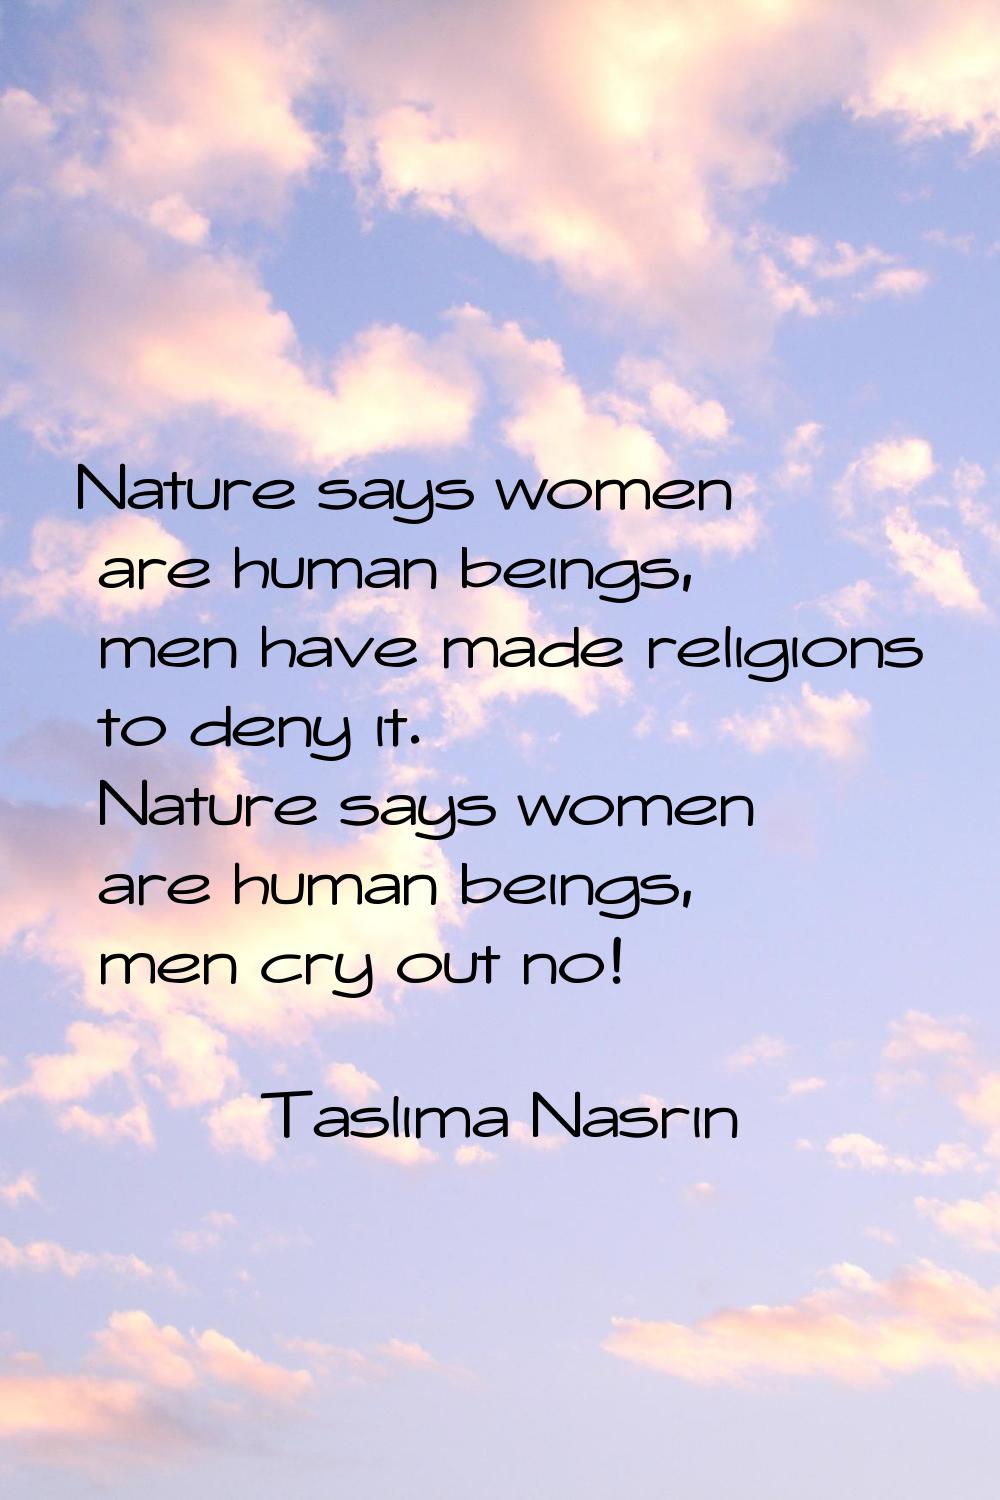 Nature says women are human beings, men have made religions to deny it. Nature says women are human